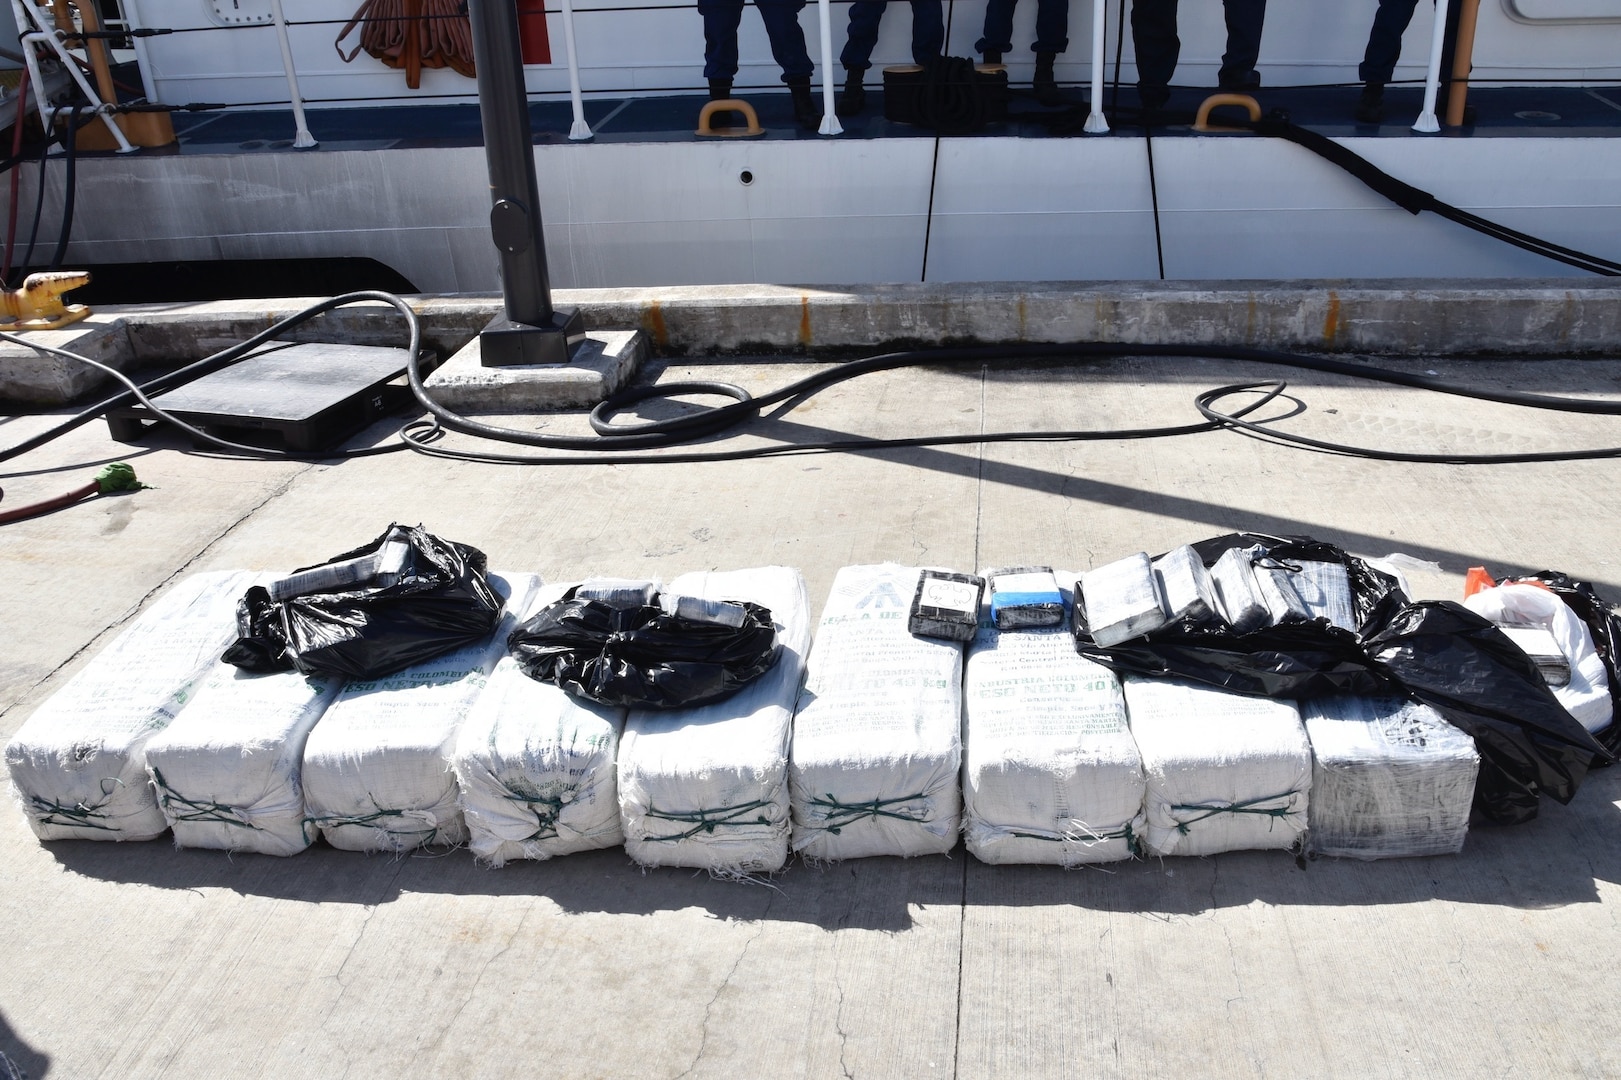 Bales of cocaine sit on the deck of Coast Guard Cutter Heriberto Hernandez.